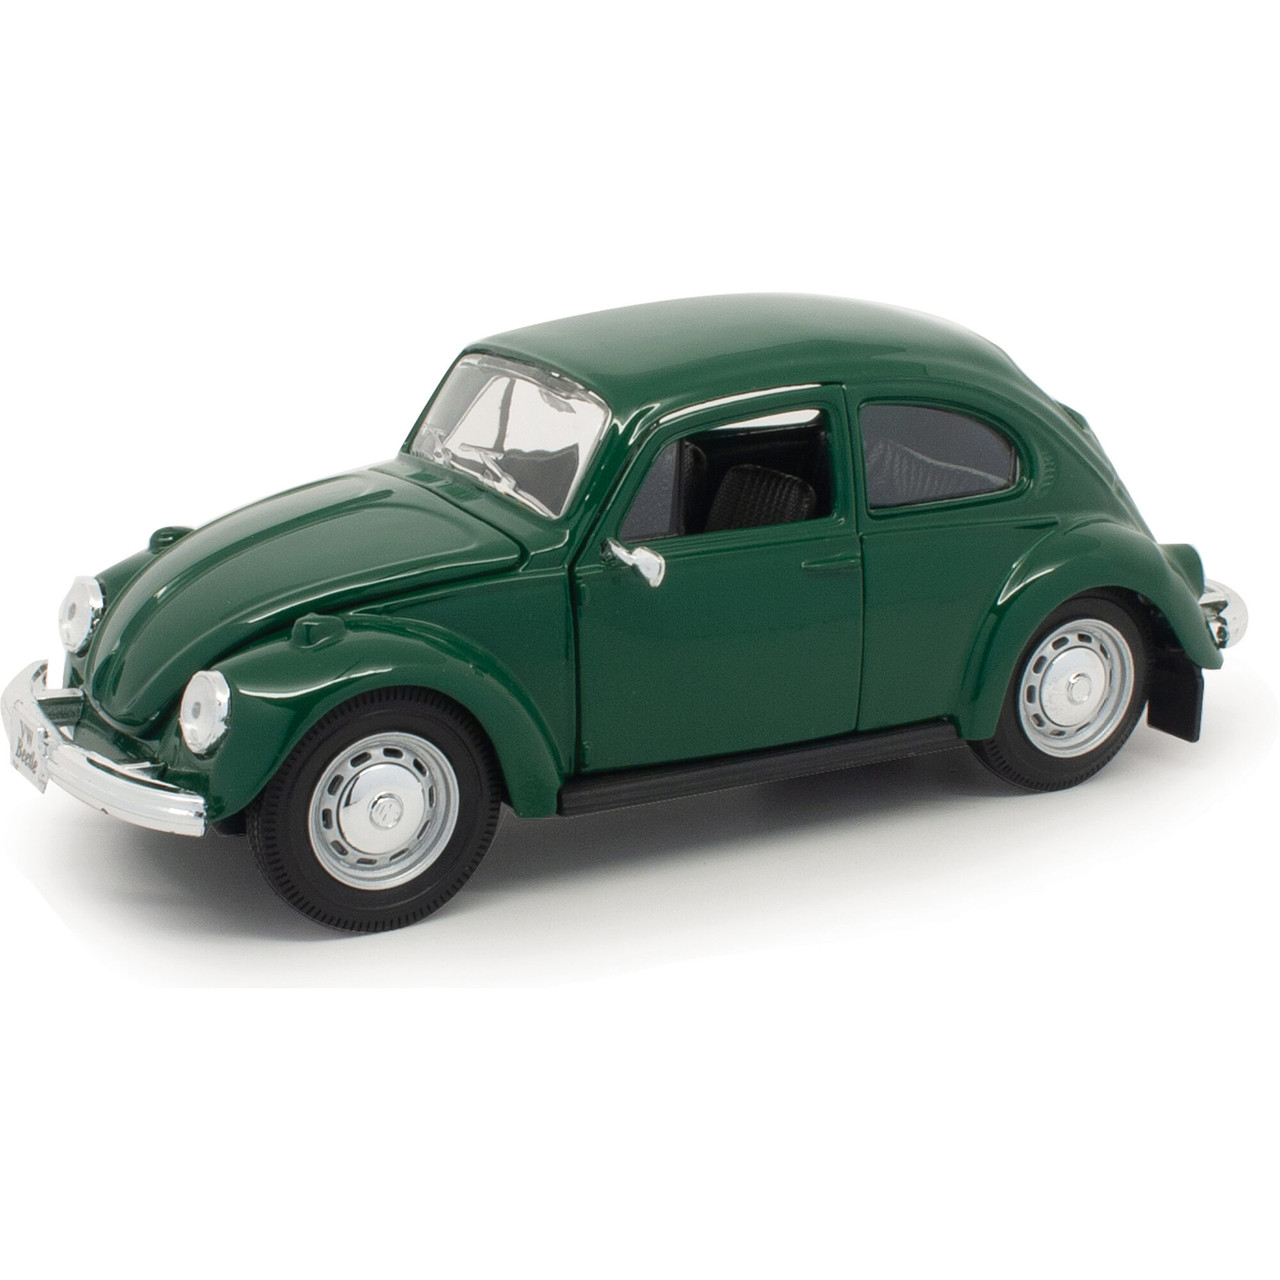 Volkswagen Beetle 1:24 Scale Diecast by Maisto | Fairfield Collectibles - The #1 Source For High Quality Diecast Scale Cars